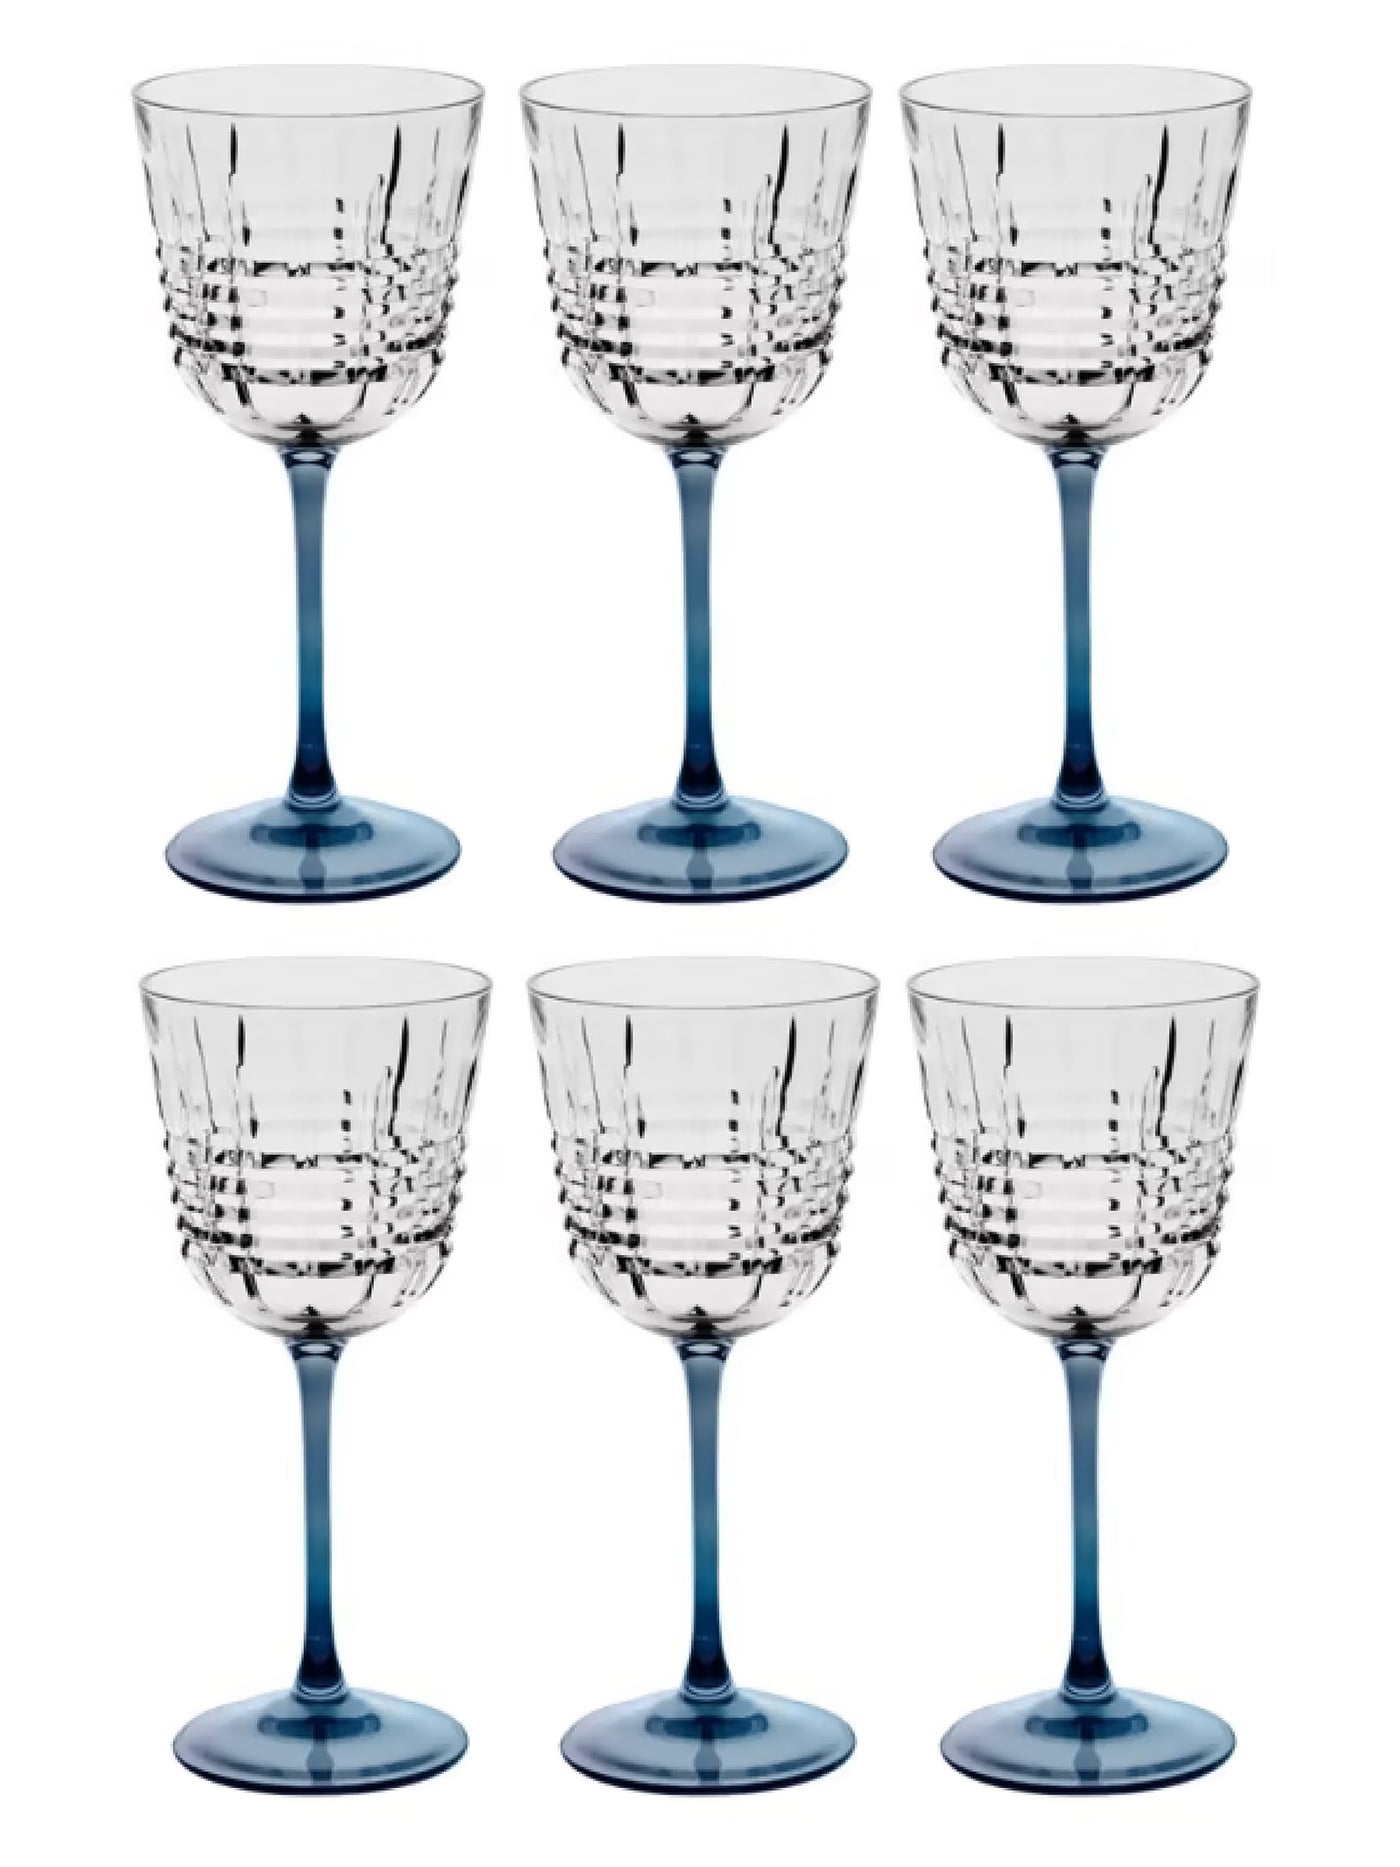 Incontro Stem Wine Glasses Set in Blue by Creart